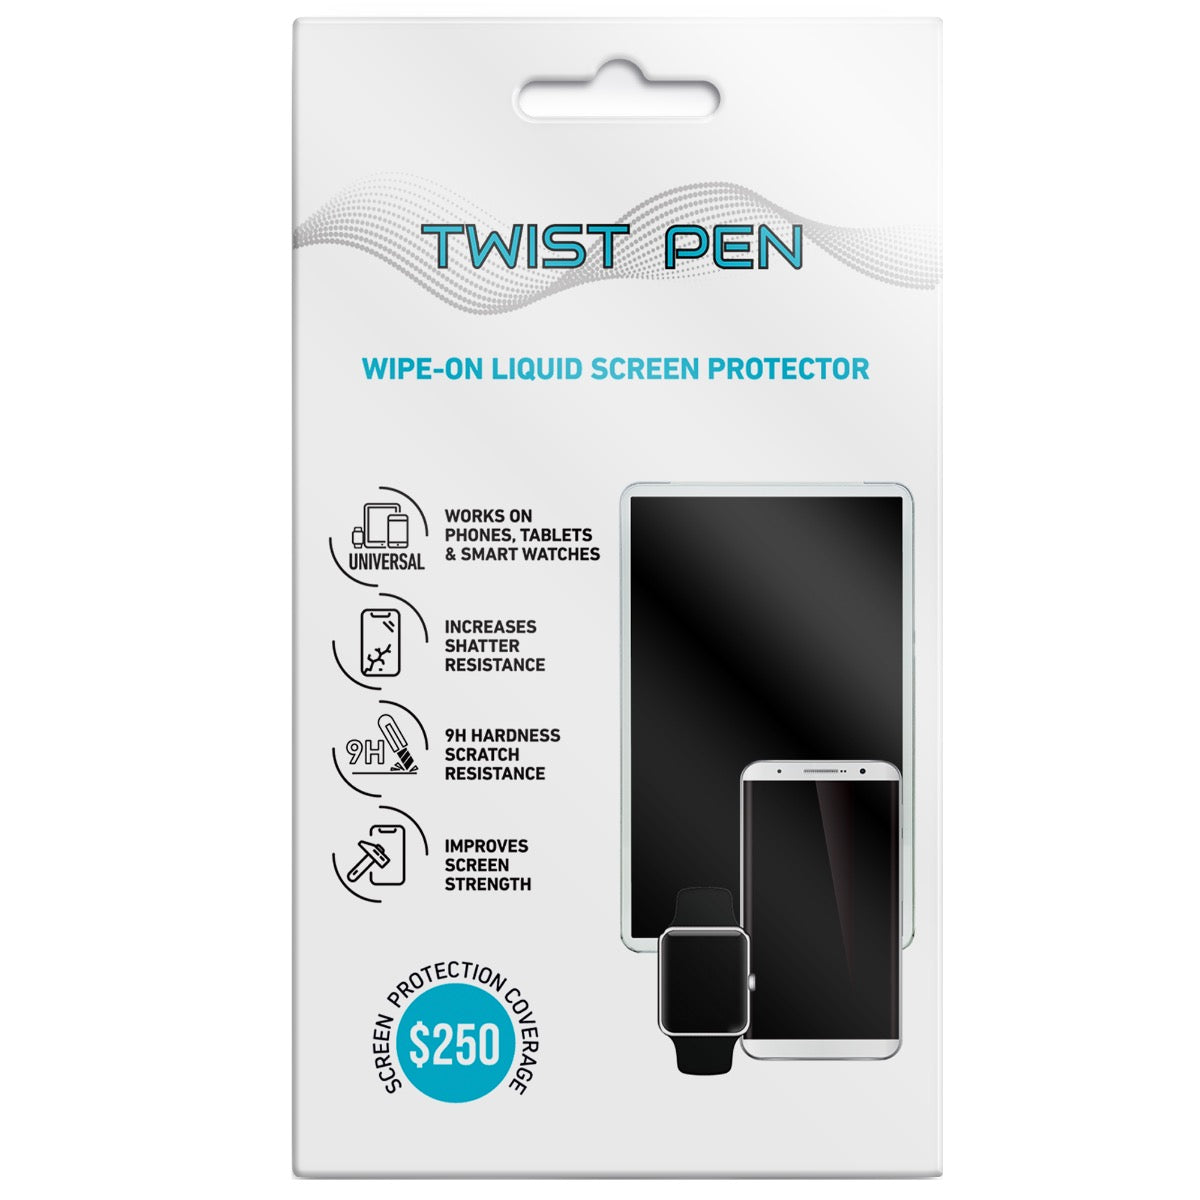 TWIST PEN Liquid Glass Screen Protector with $250 Coverage for All Devices